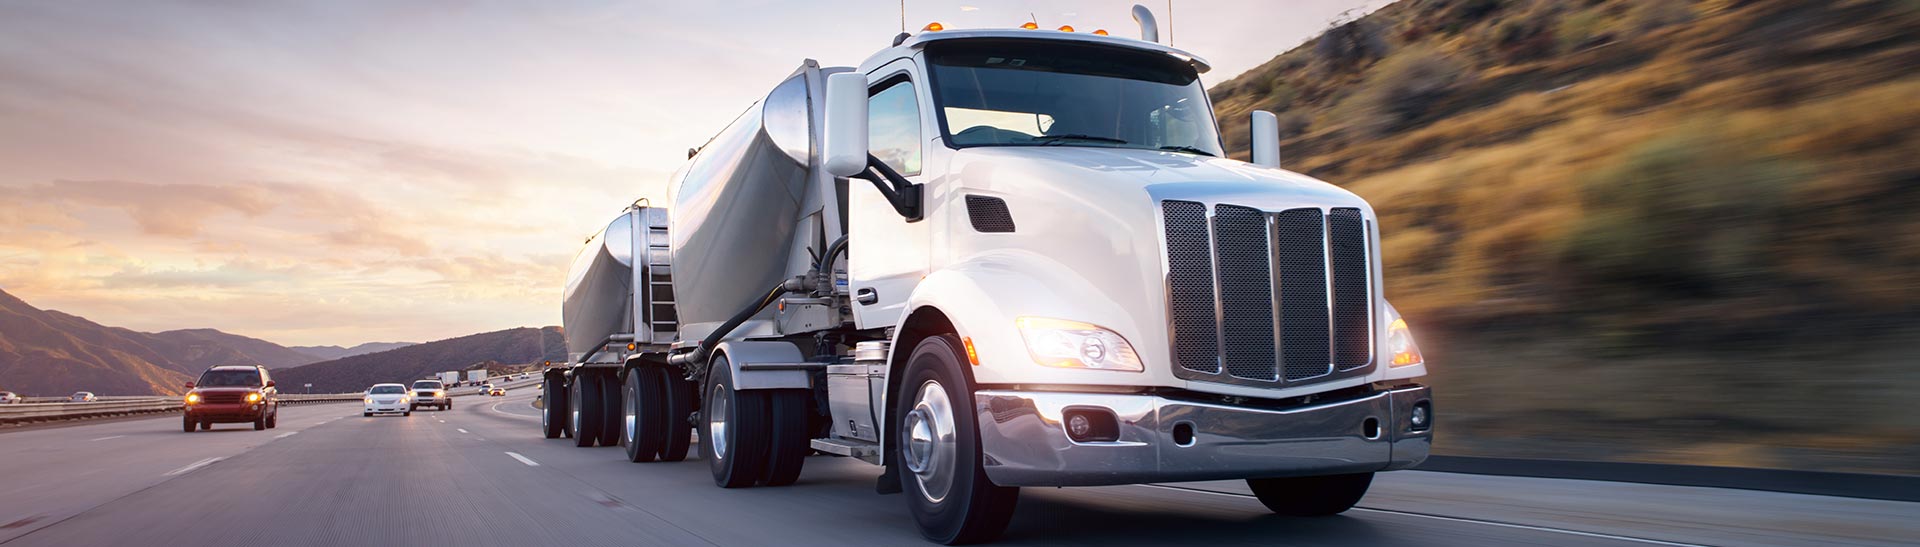 Naperville Trucking Company, Trucking Services and Intermodal Trucking